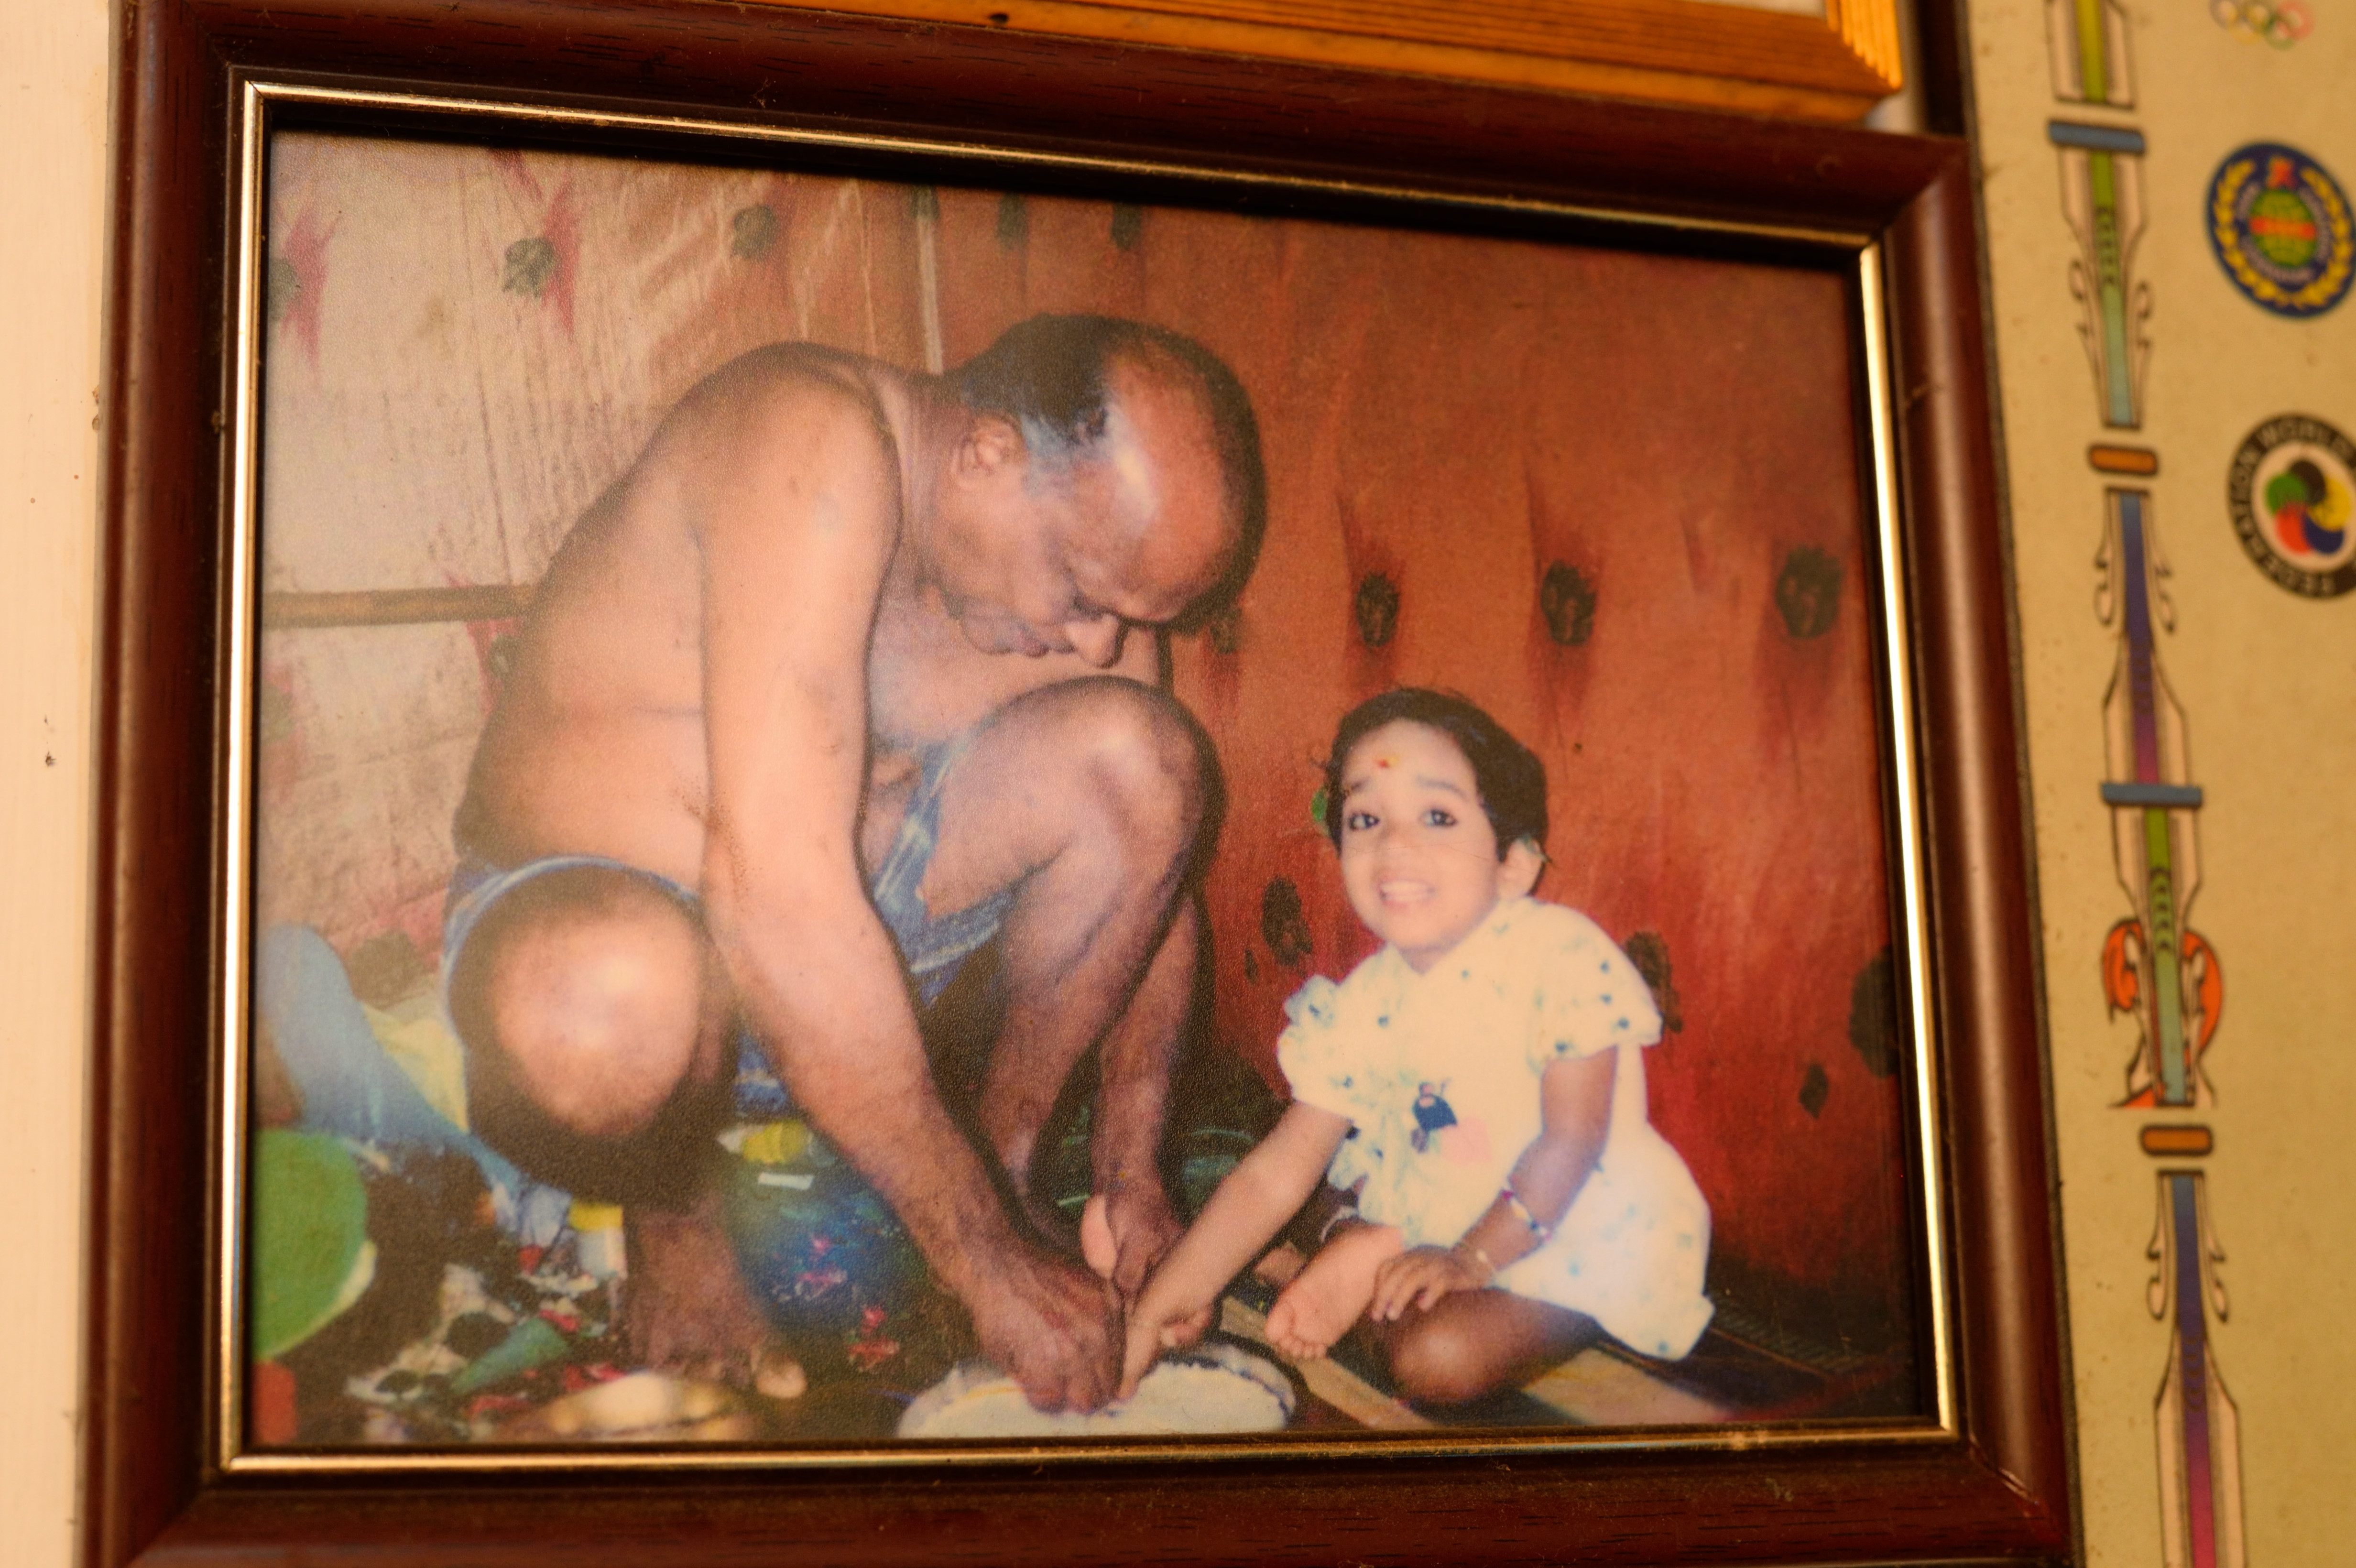 Meenakshi Amma, pictured here as a child with her father, started kalaripayattu at the traditional age of seven, despite the fact that few girls participated in the martial art when it reemerged in the mid 20th century.